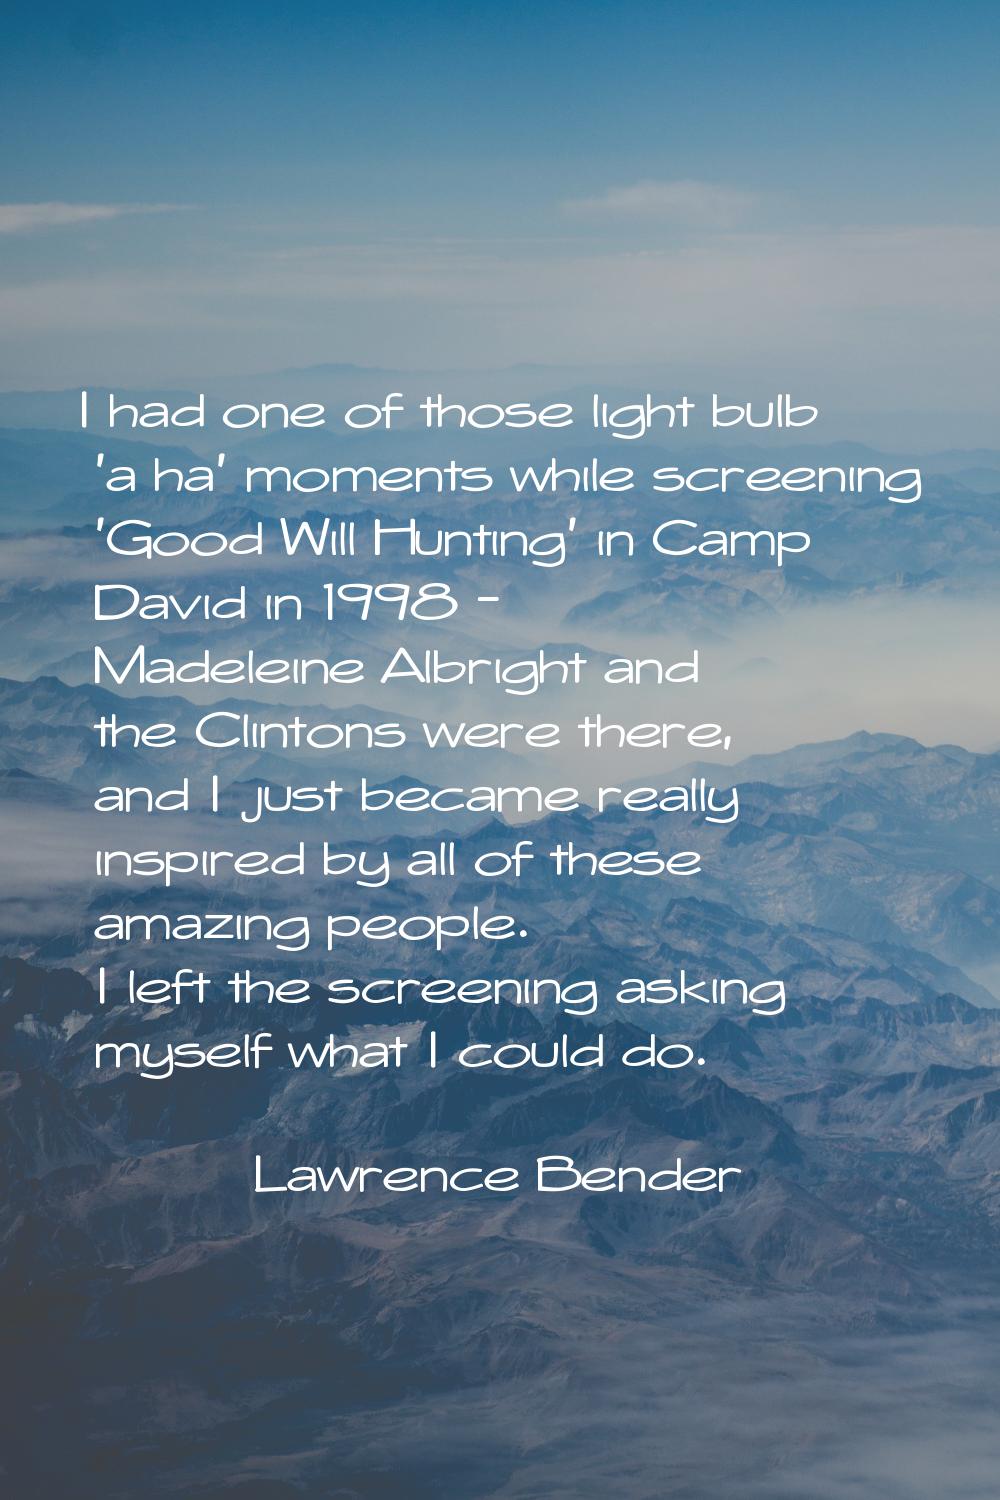 I had one of those light bulb 'a ha' moments while screening 'Good Will Hunting' in Camp David in 1